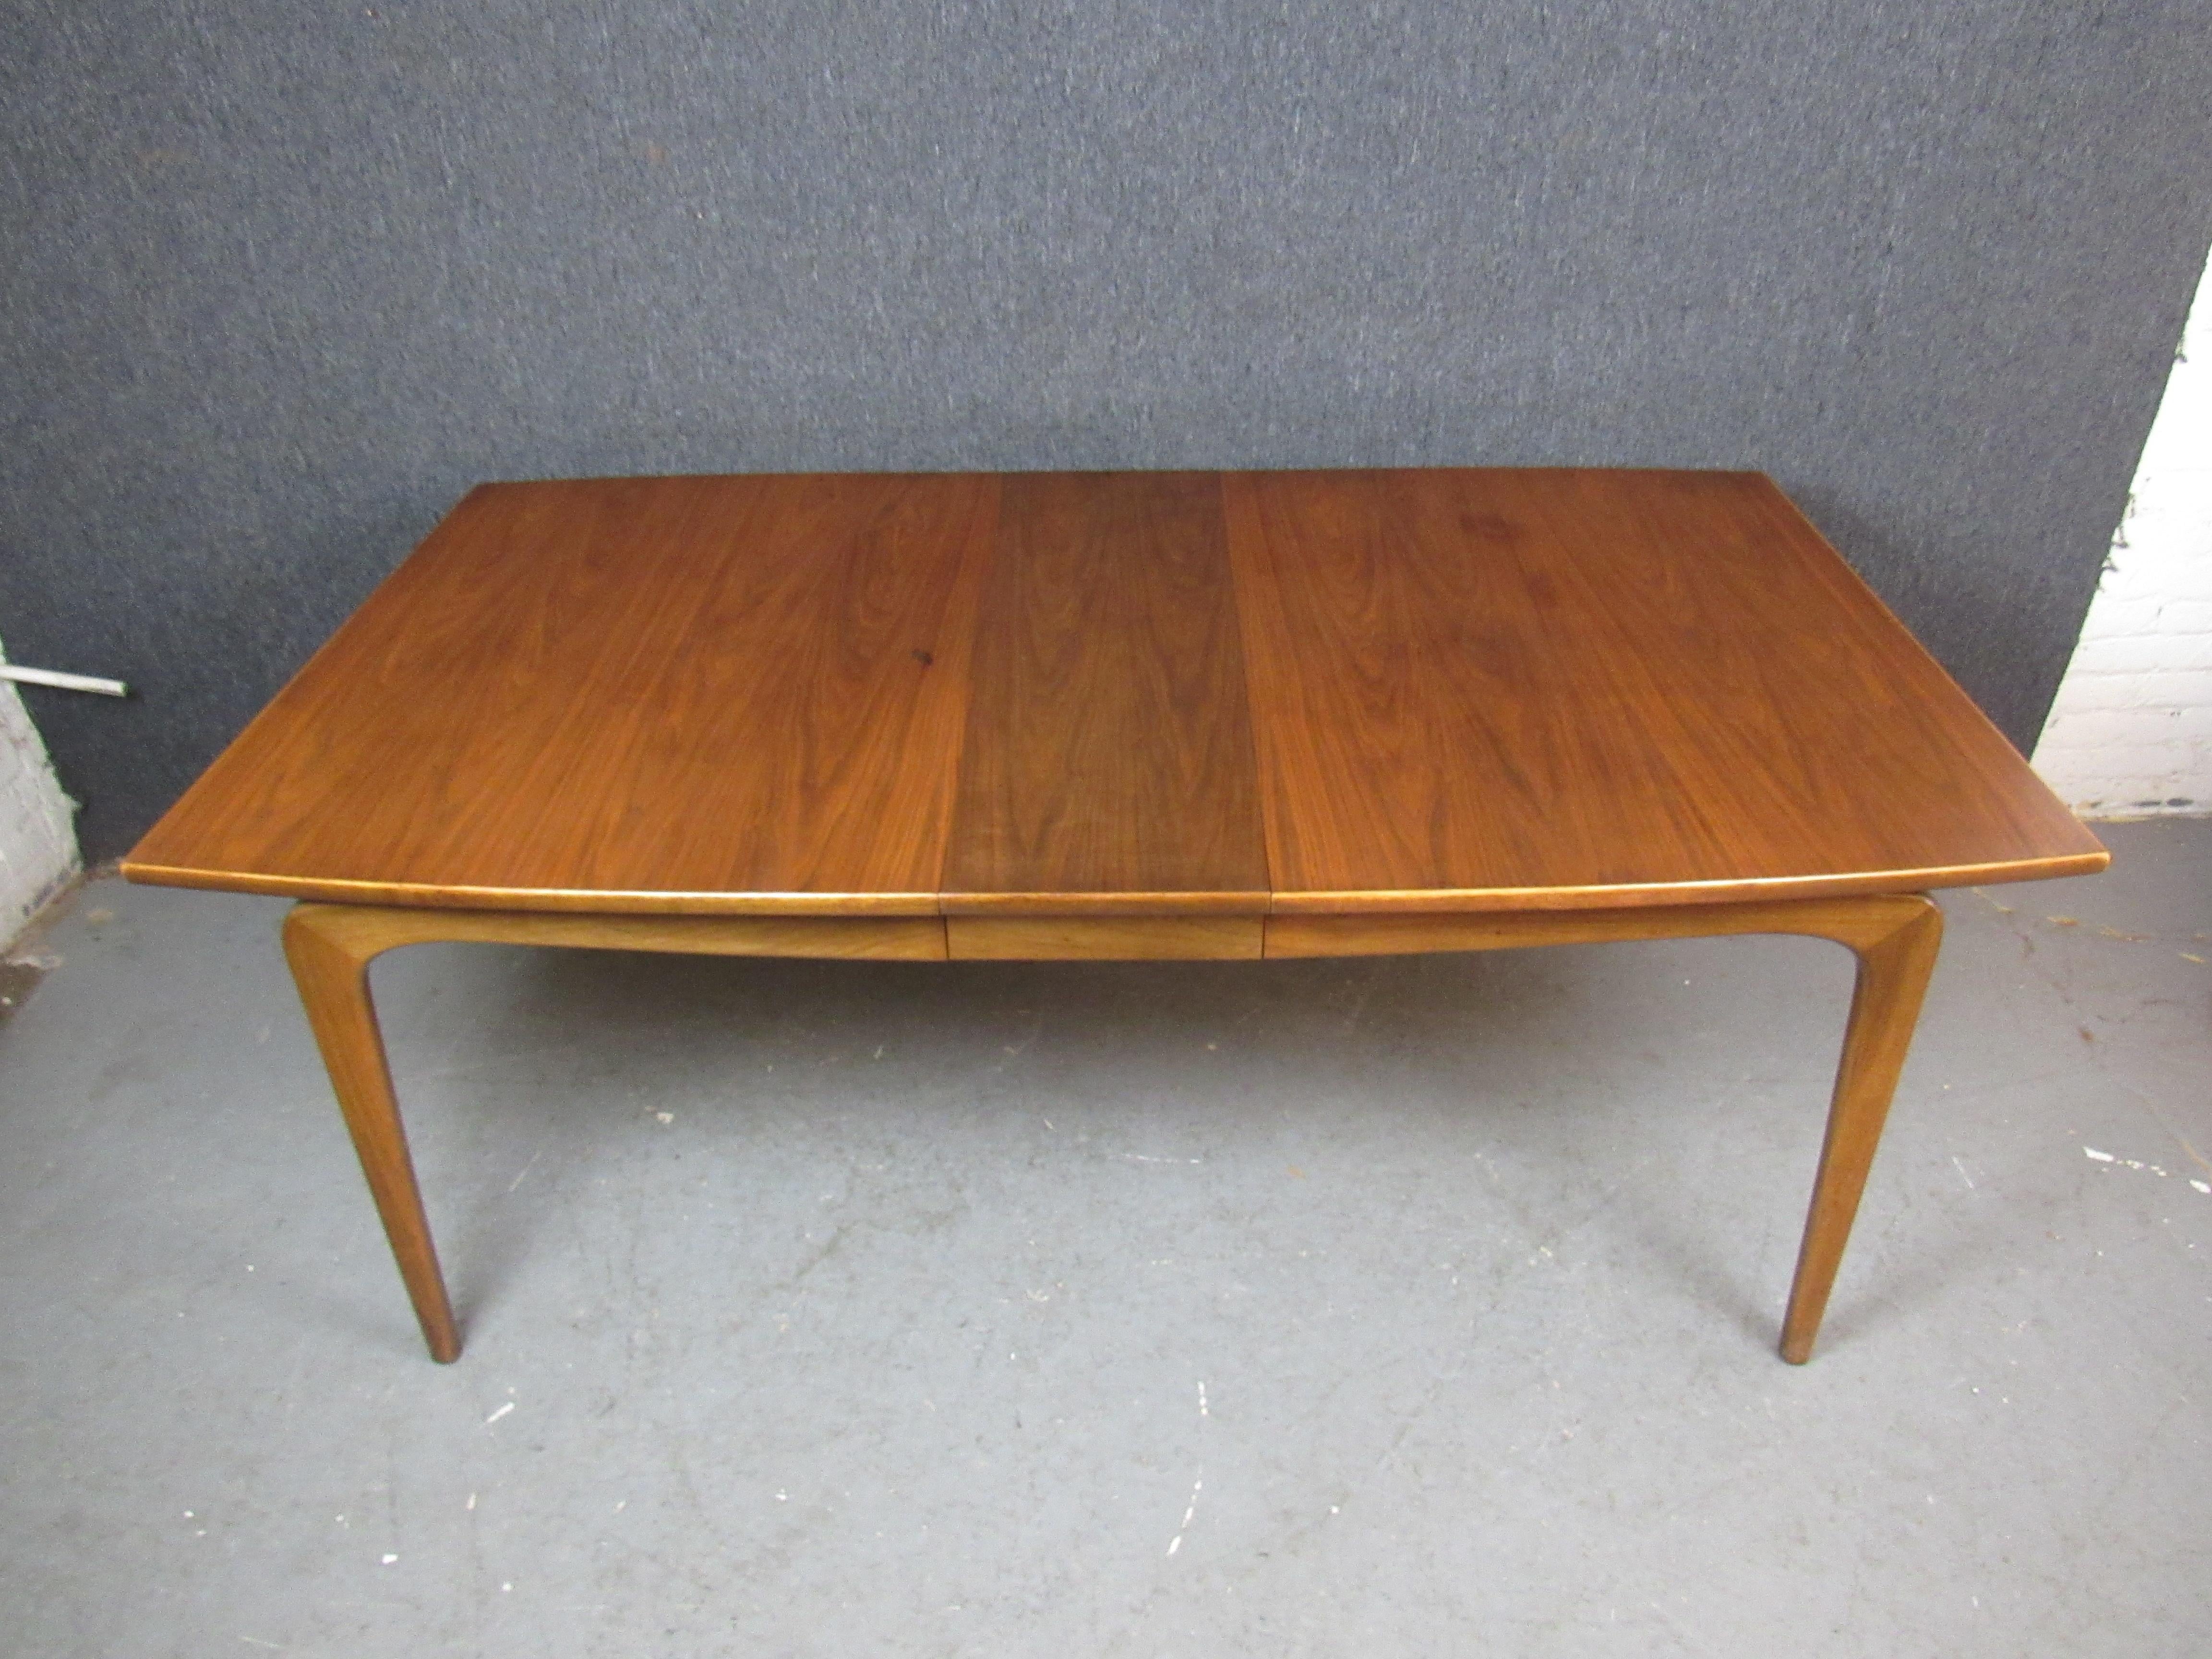 Take advantage of genuine mid-century American craftsmanship with this exceptional vintage dining table from Lane Furniture of Altavista, Virginia. Designed for their highly sought-after 